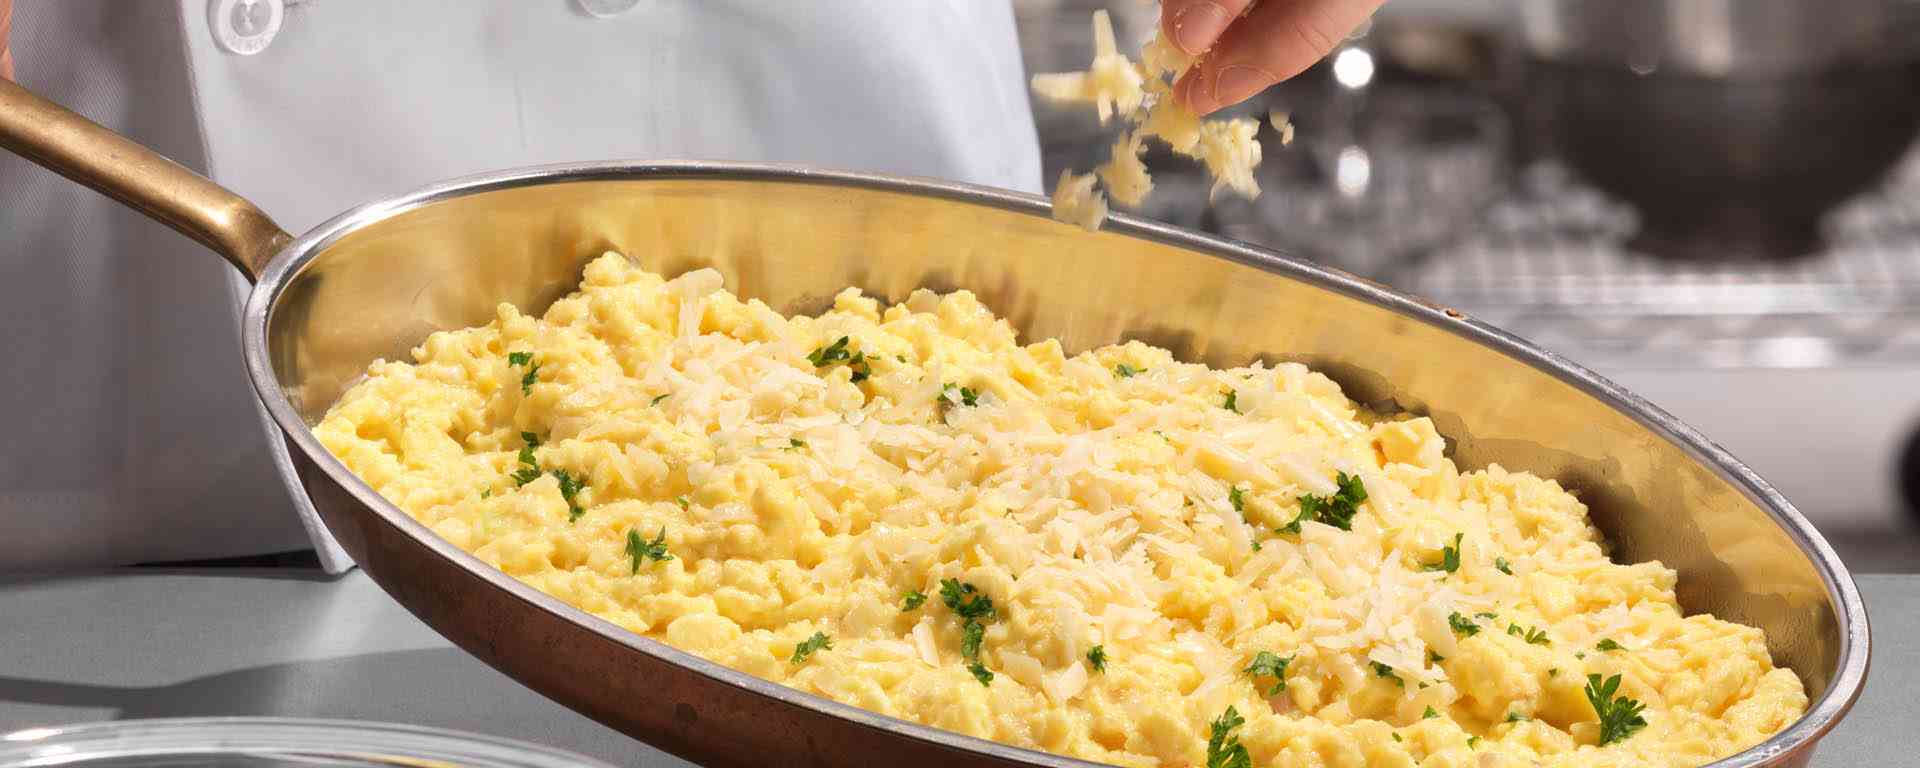 Photo of - Fluffy Egg and Cheddar Scramble